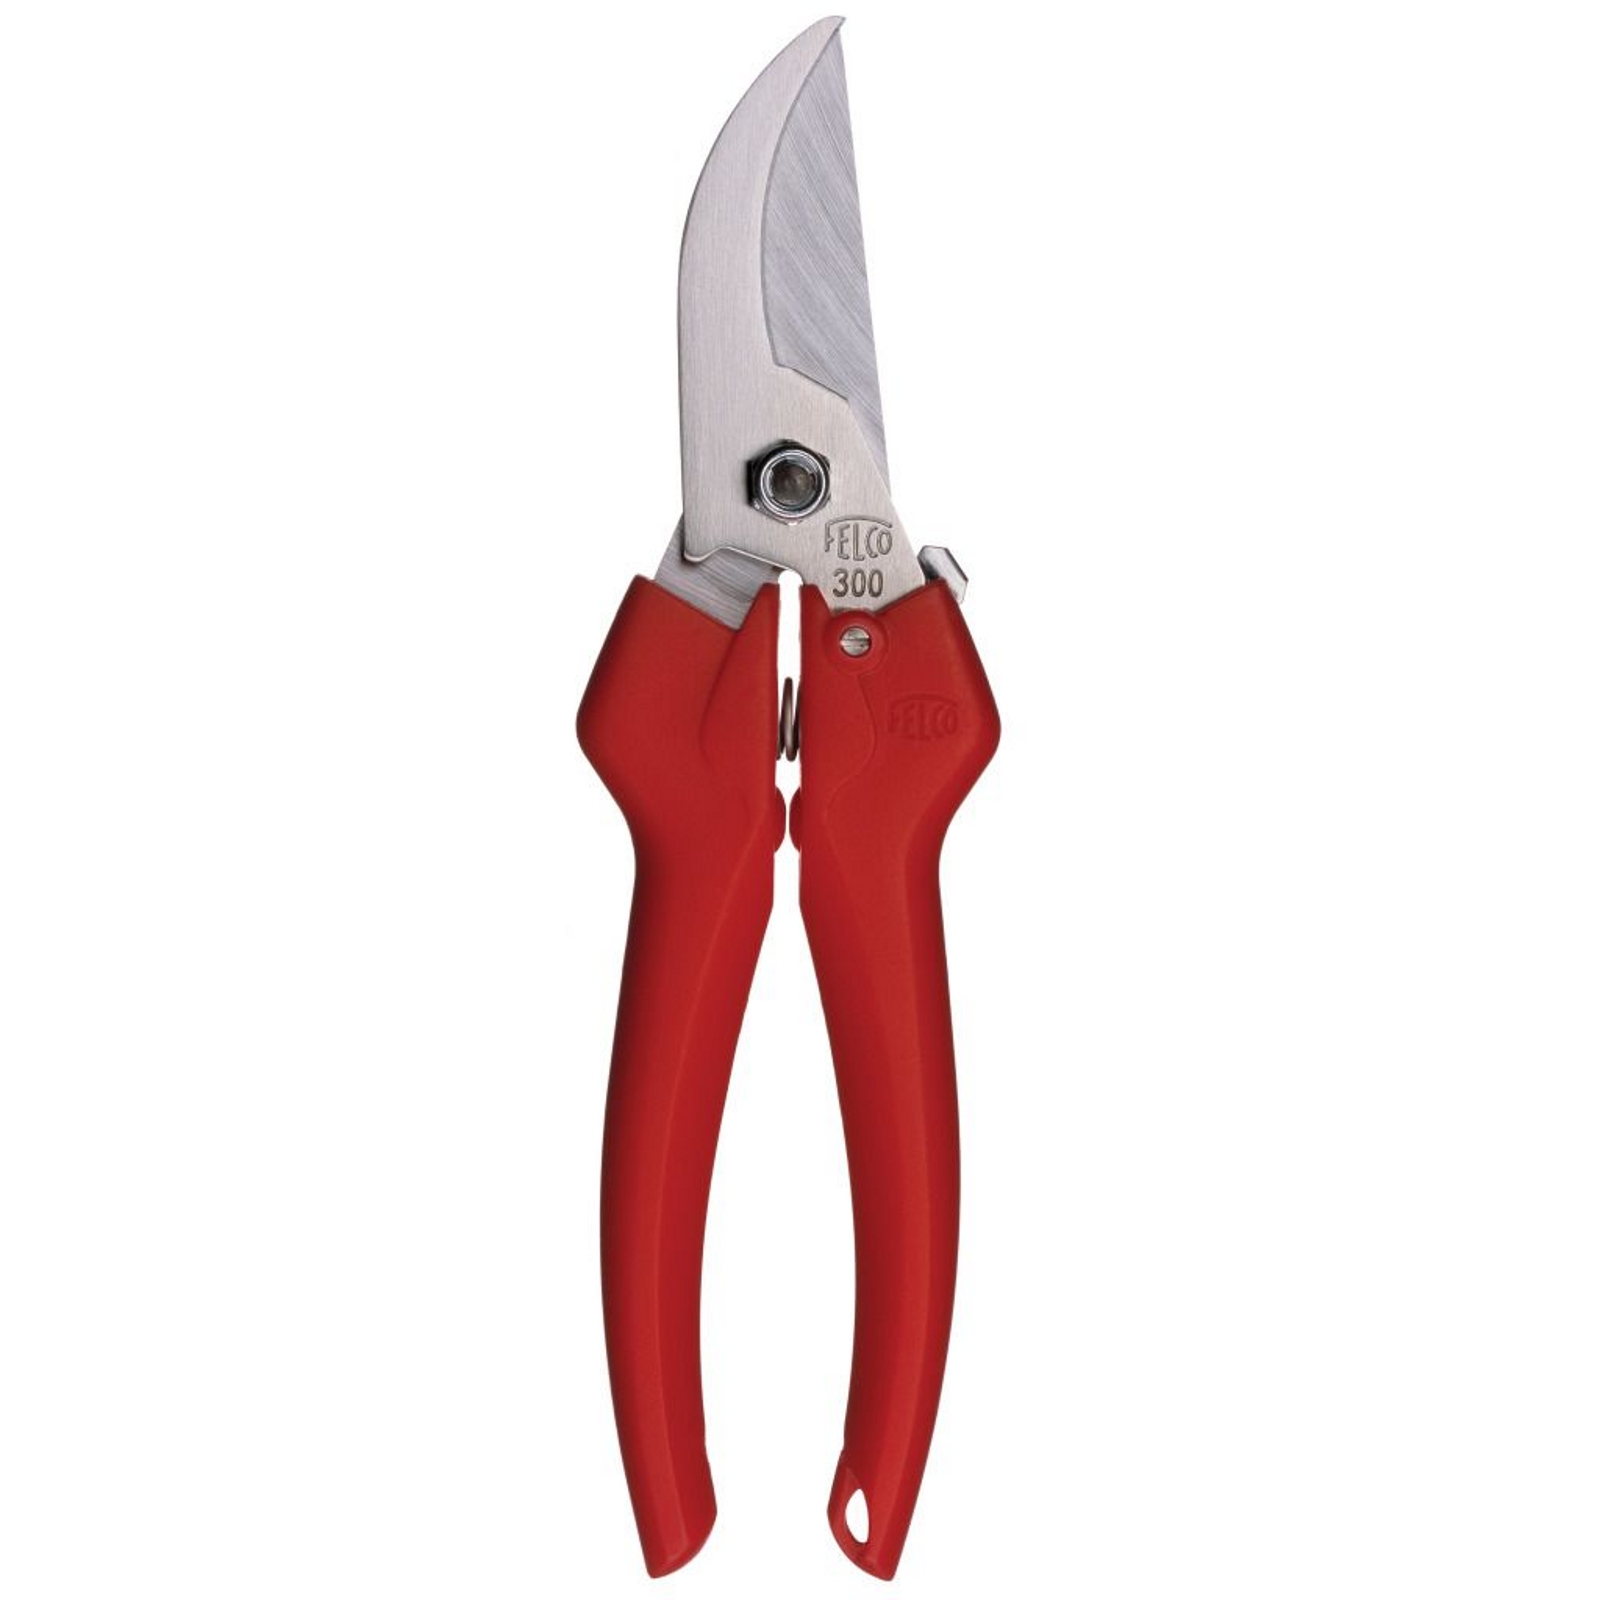 FELF300 Felco Picking and Trimming Snips